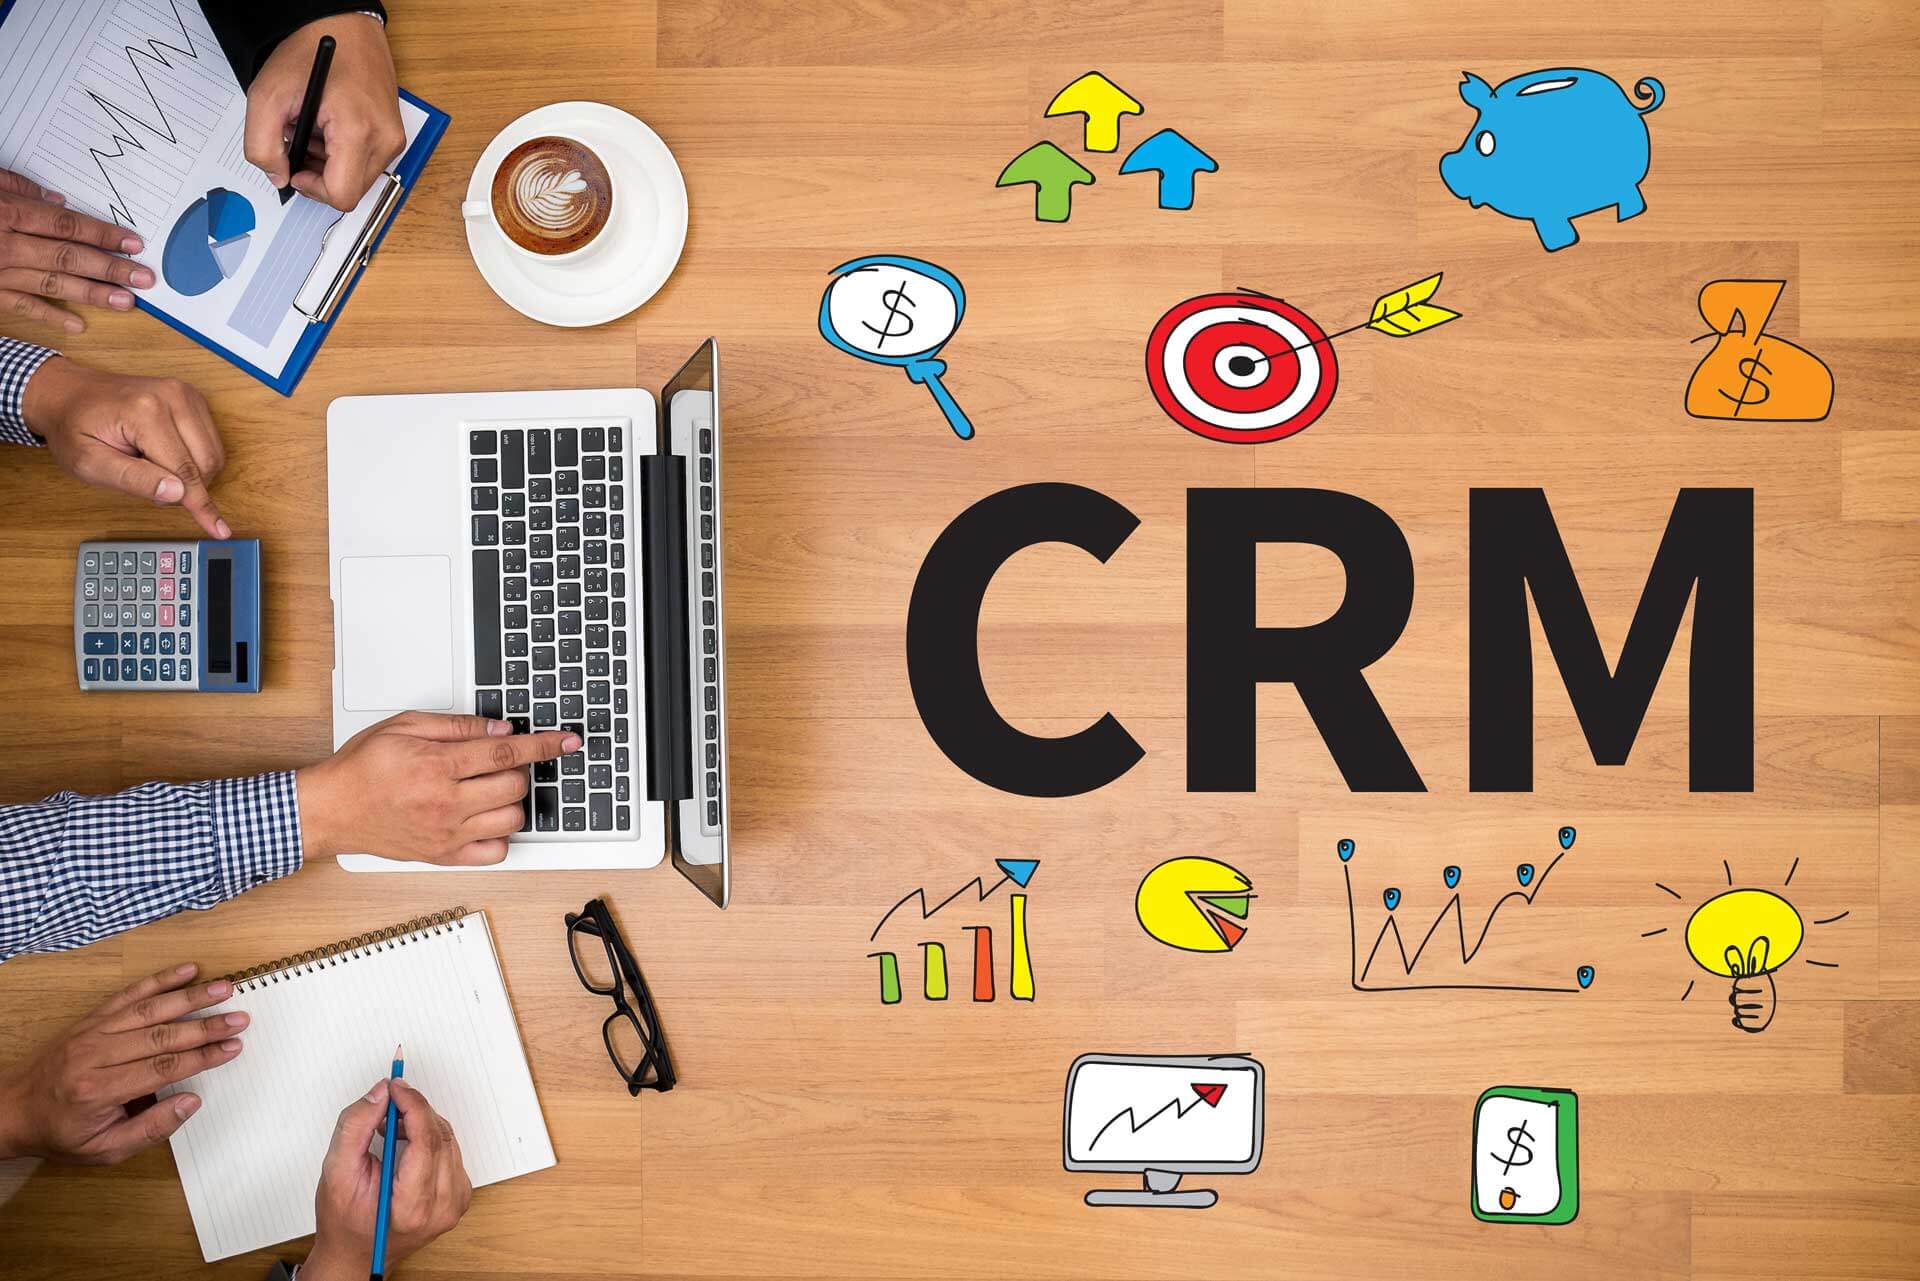 3 questions to ask yourself before using CRM - Do you need CRM at all